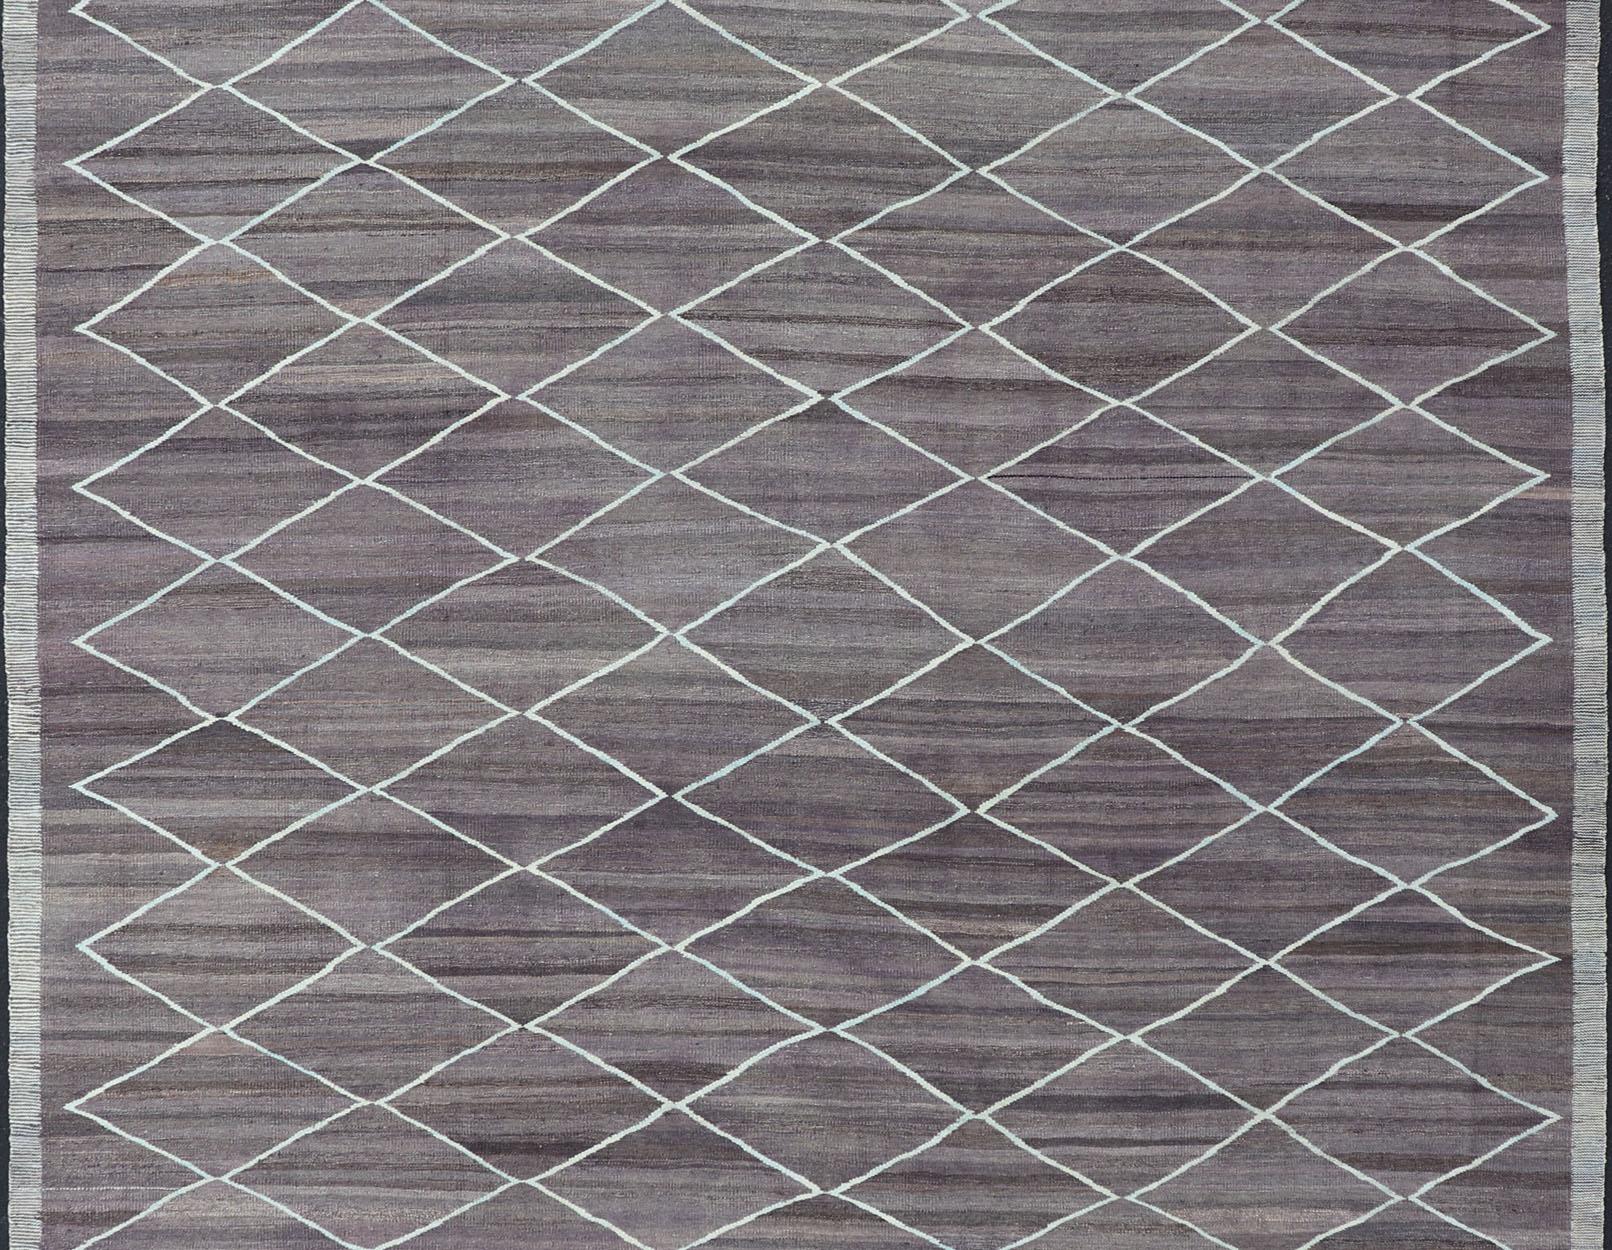 Large Modern flat-weave Fine Kilim rug in shades of dark purple, brown and light blue green highlights. rug AFG-27634, country of origin / type: Afghanistan / Kilim

This unique Kilim with a Minimalist design features a repeating diamond pattern,